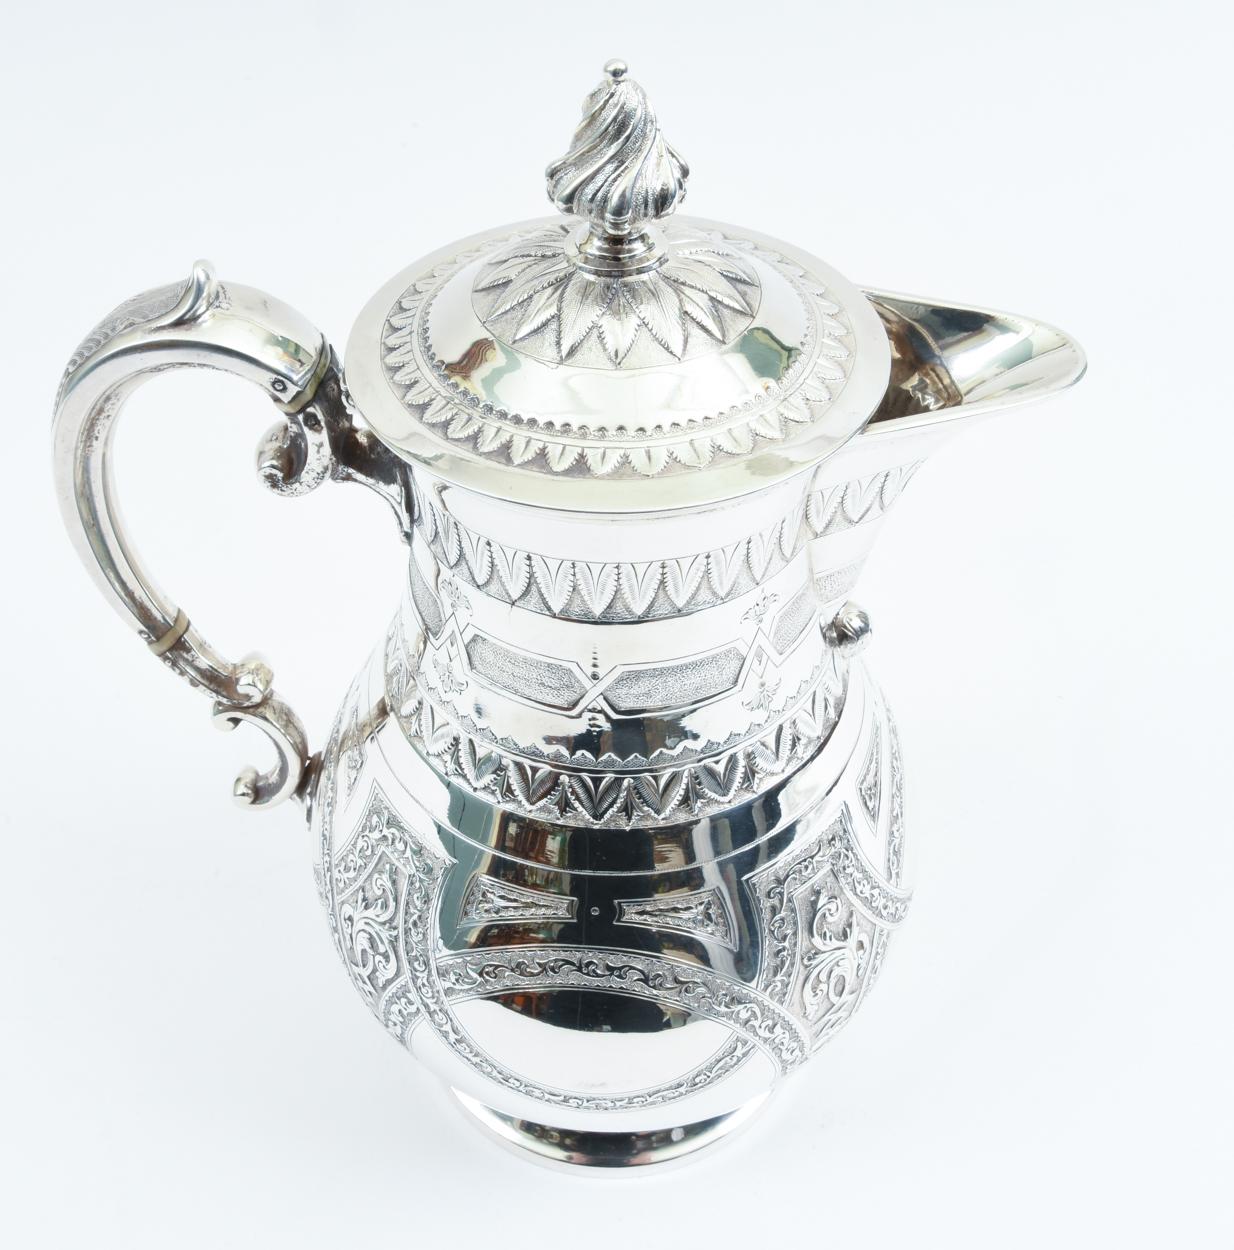 19th Century Ornate Exterior Design Details English Silver Plate Tea or Coffee Pot